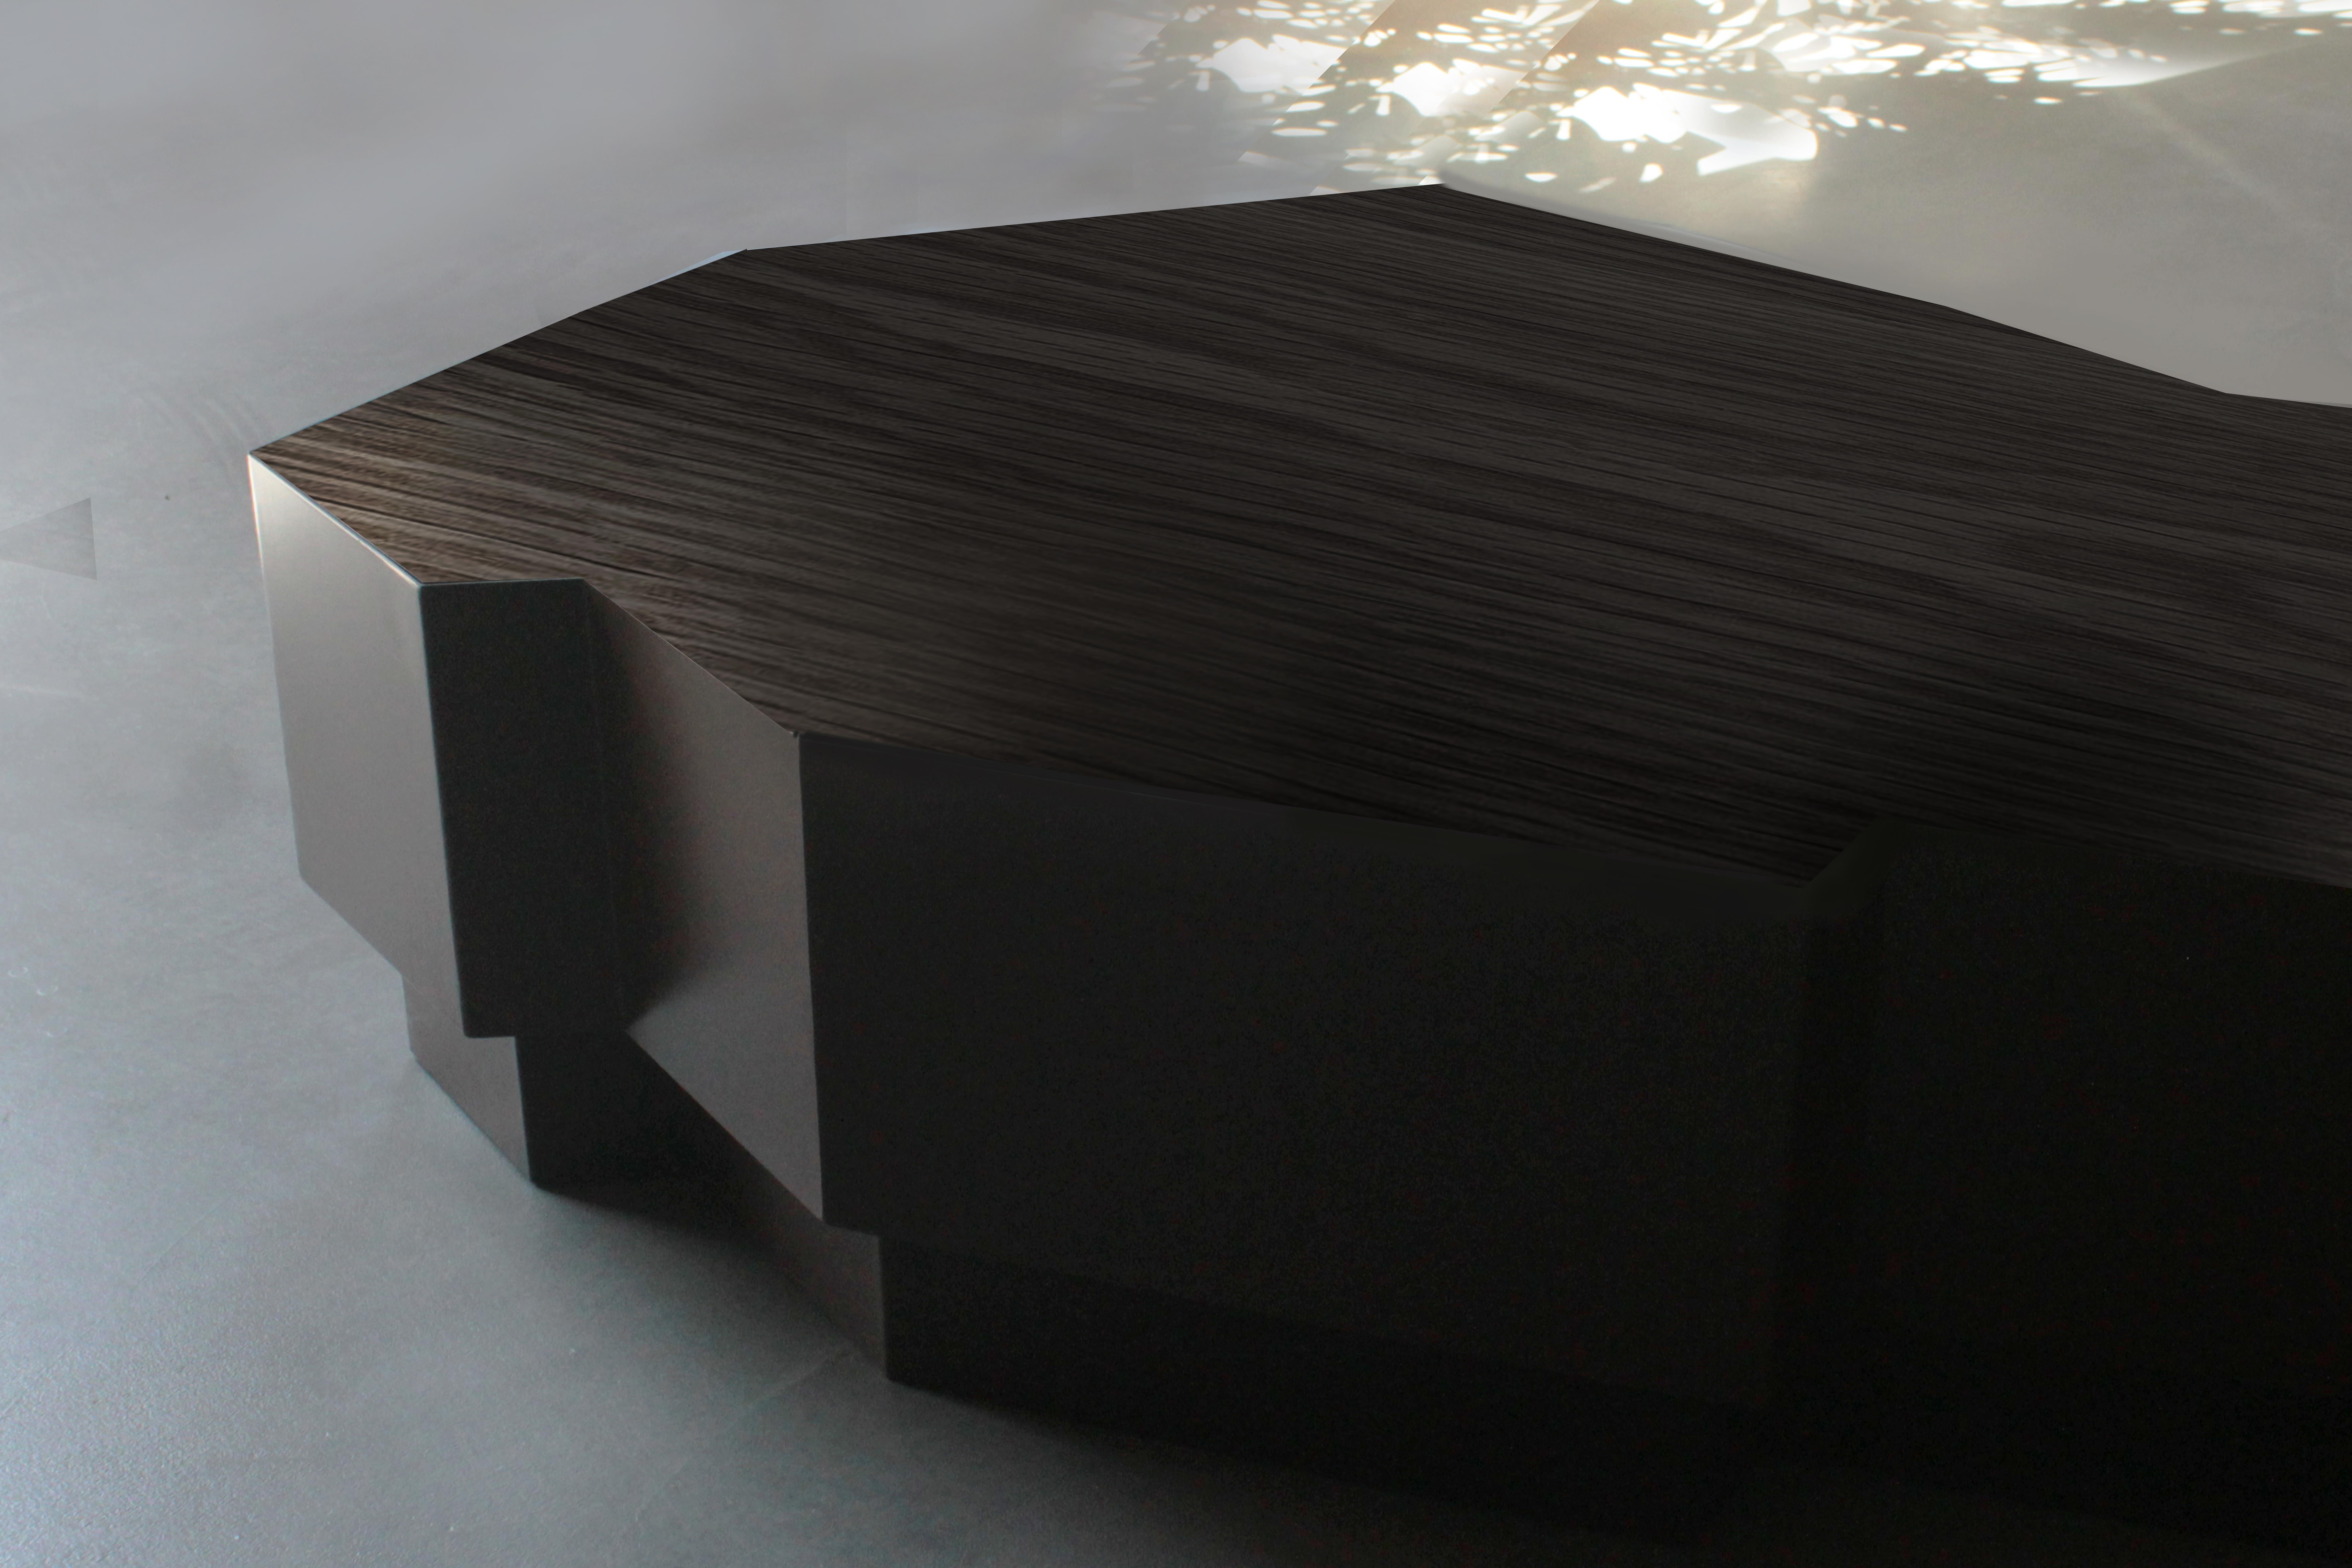 This coffee table is part of a collection inspired by the nature created by the artist and designer Raoul Gilioli.
The artist creates and produces each piece of the collection in collaboration with the best Italian artisans and each piece is